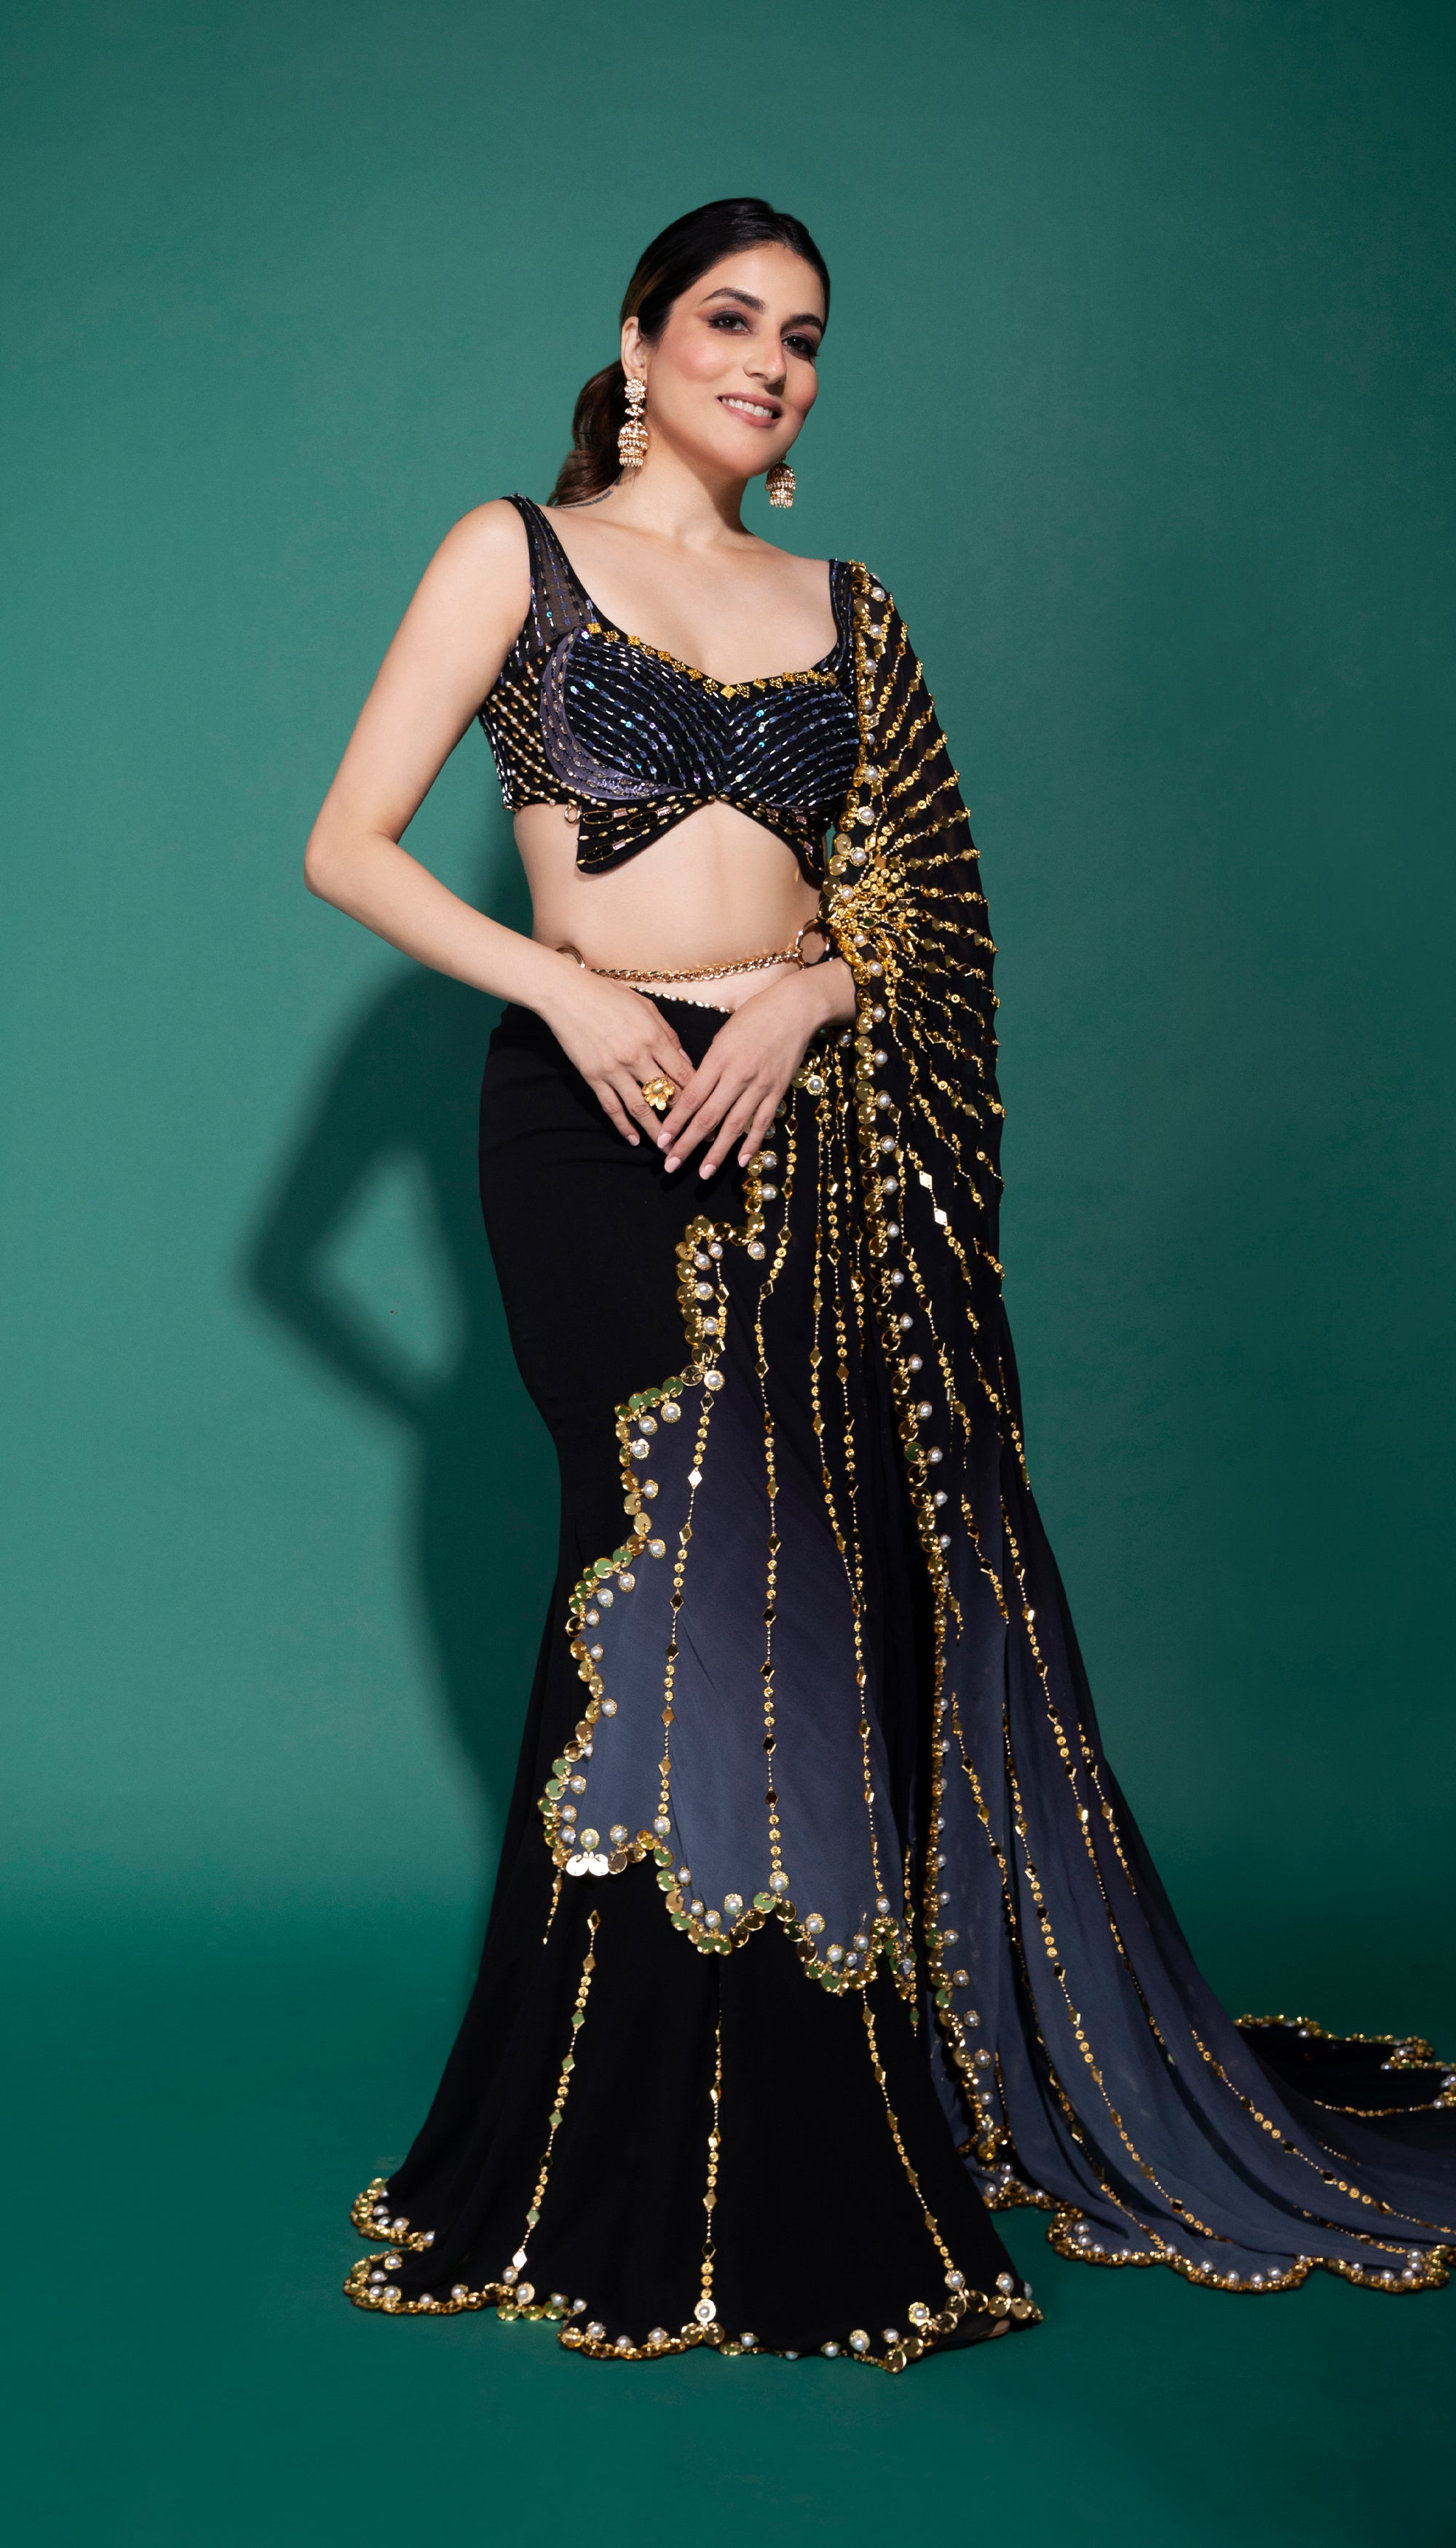 7 Pre Stitched Saree Designs to Try for Your Next Party | Saree designs,  Saree trends, Latest indian fashion trends